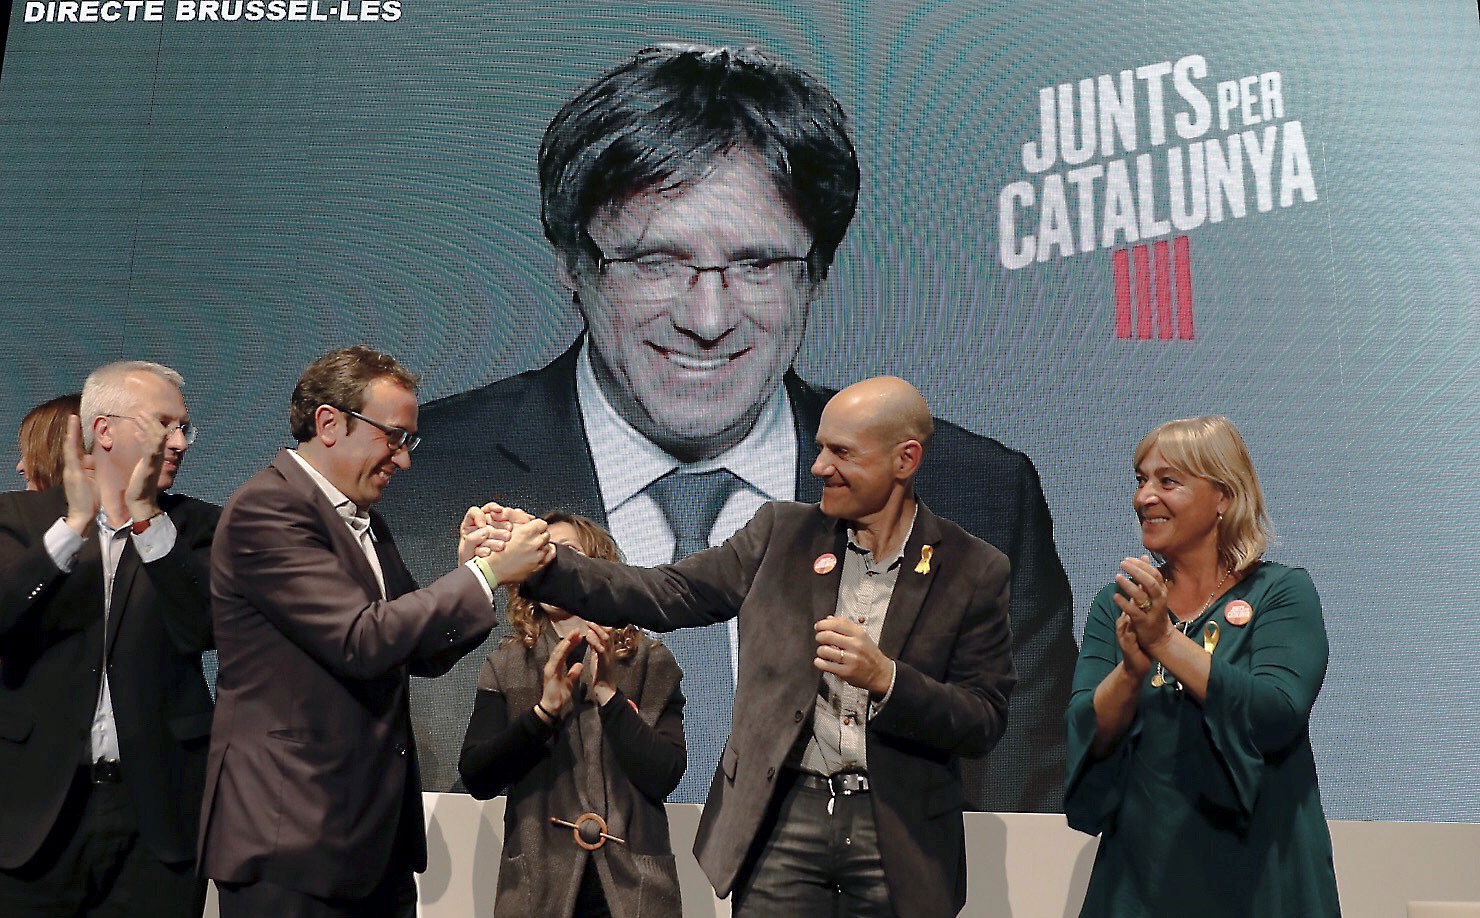 Junts per Catalunya's candidates Josep Rull (2ndL) and Xavier Quintillá (2ndR) shake hands as Catalonia's former president Carles Puigdemont (at the screen) speaks in a videoconference from Brussels during an electoral campaign event in Lleida, Catalonia, Spain, Dec. 18, 2017.